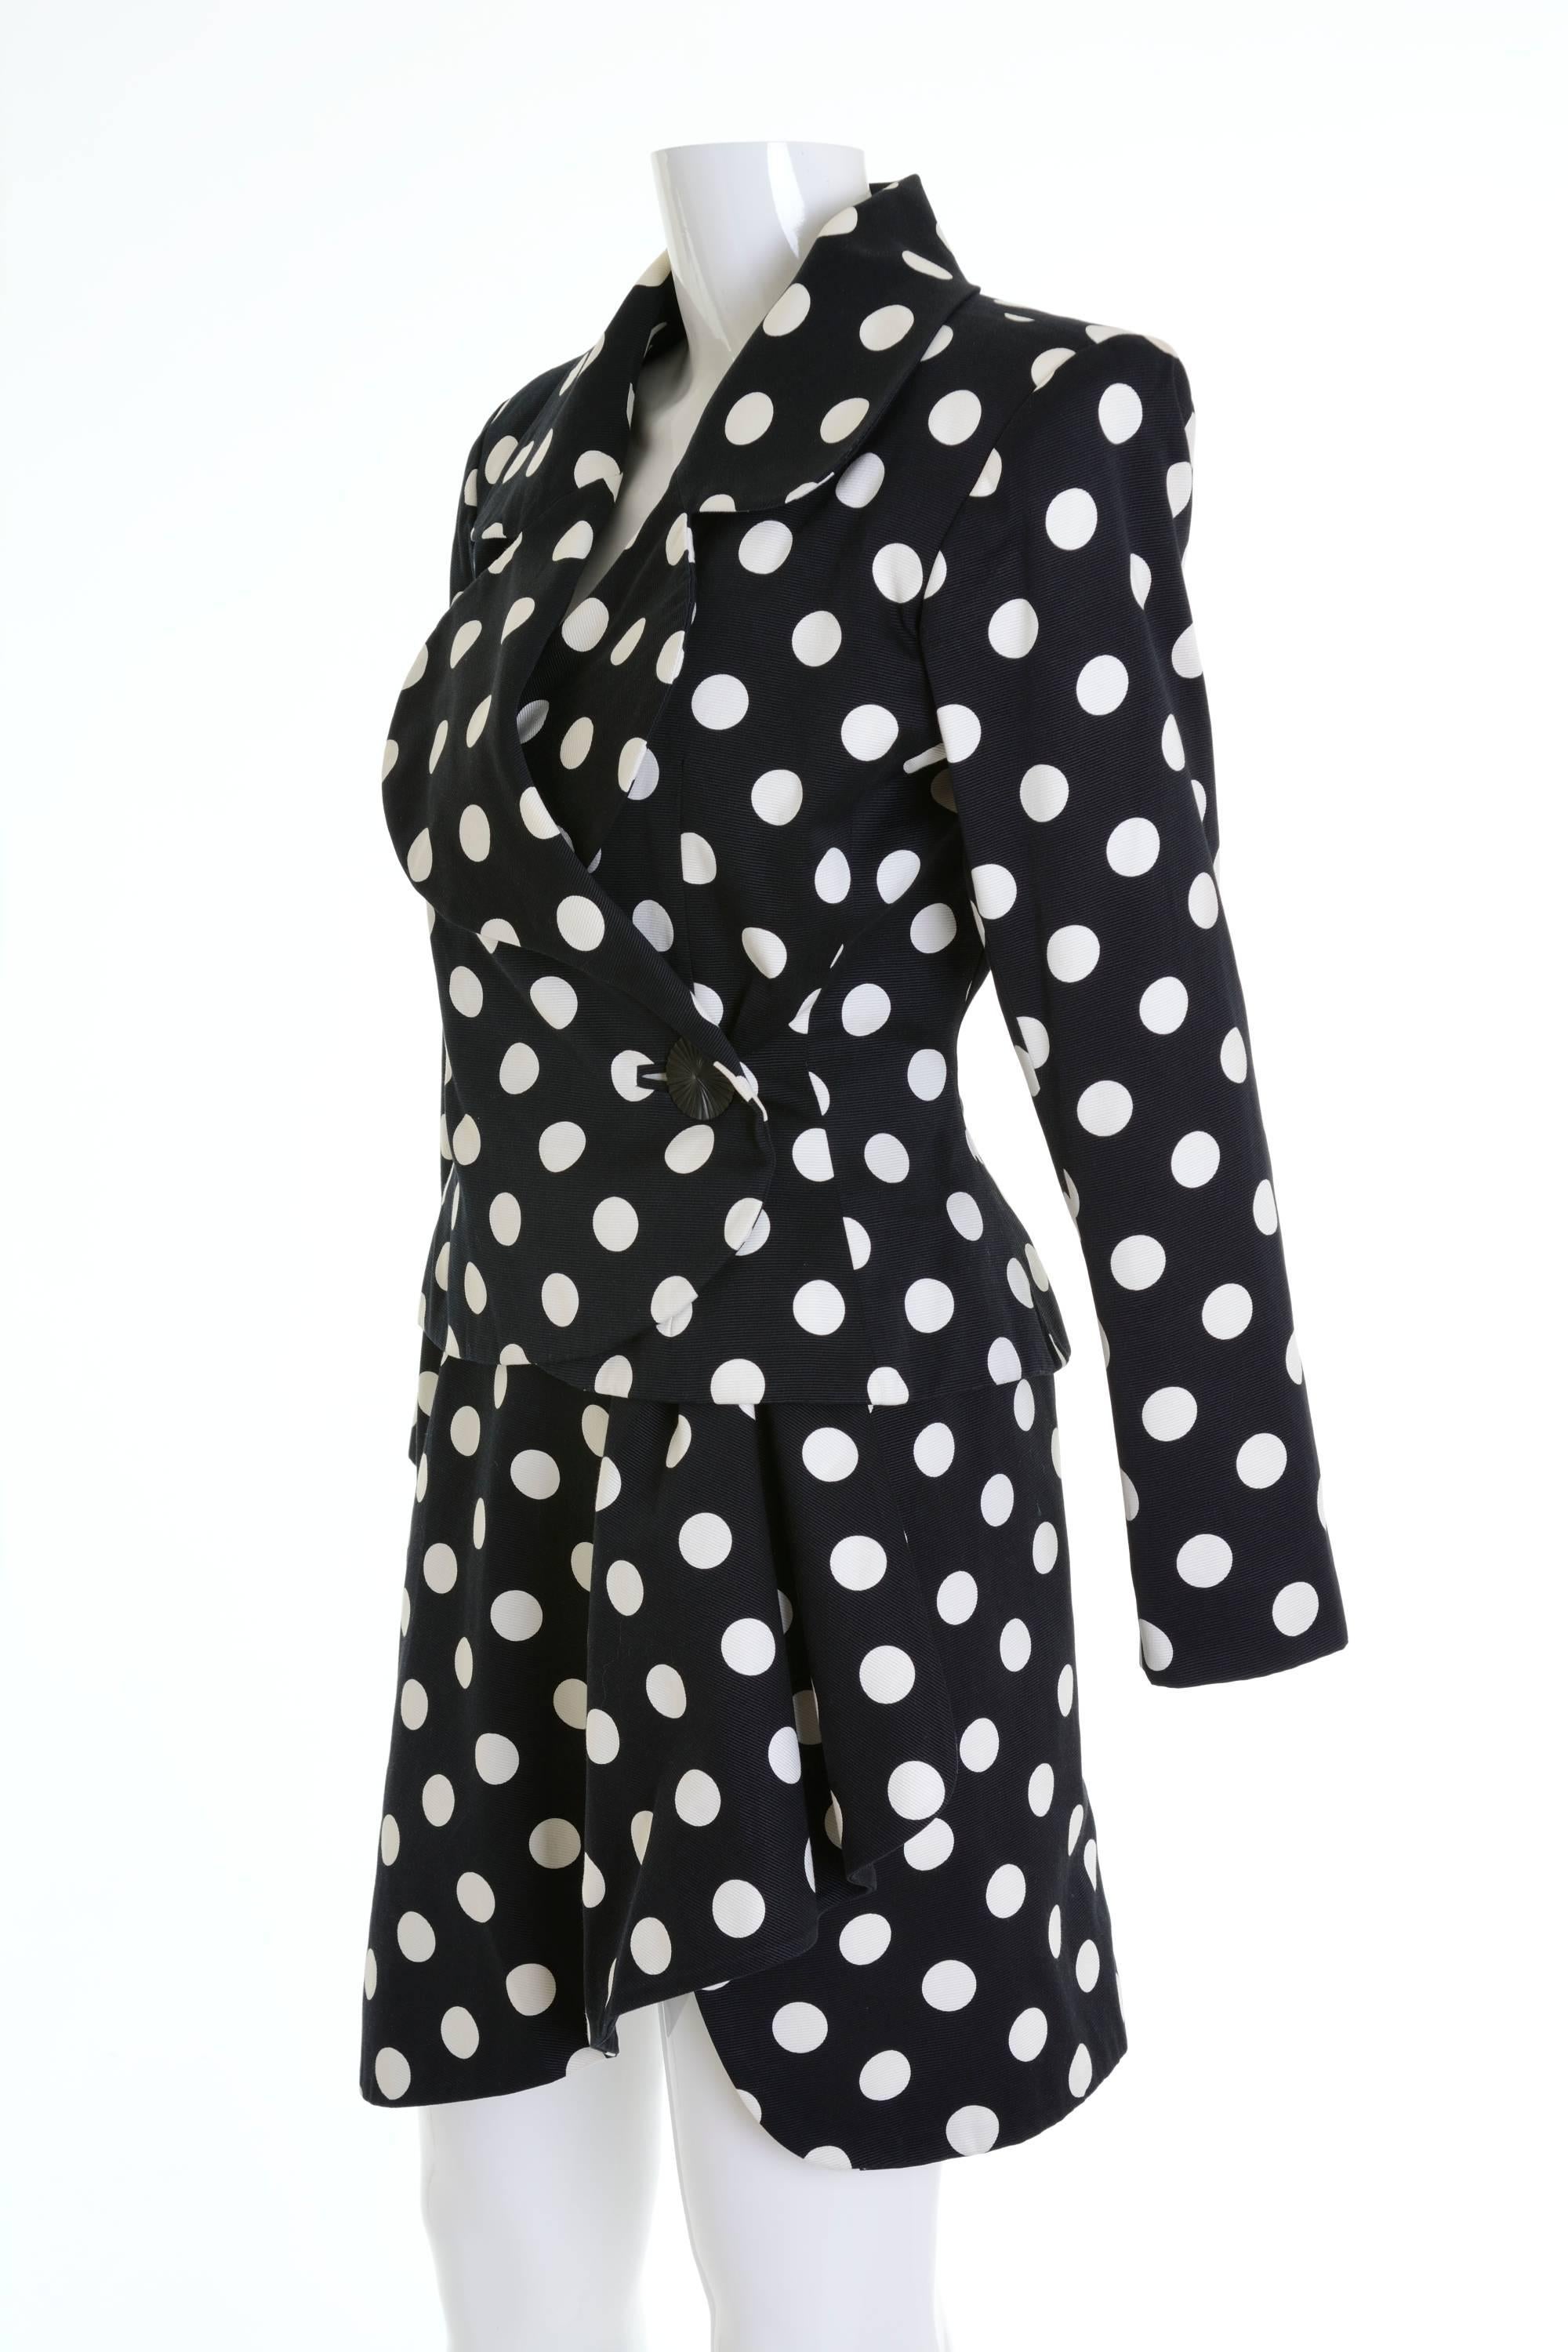 This lovely early 1990s Yves Saint Laurent Rive Gauche suit dress is in a black pique cotton fabric with white polka dots print. It has fitted jacket with padded shoulders and wrap mini skirt. It's fully satin lined.

Excellent vintage